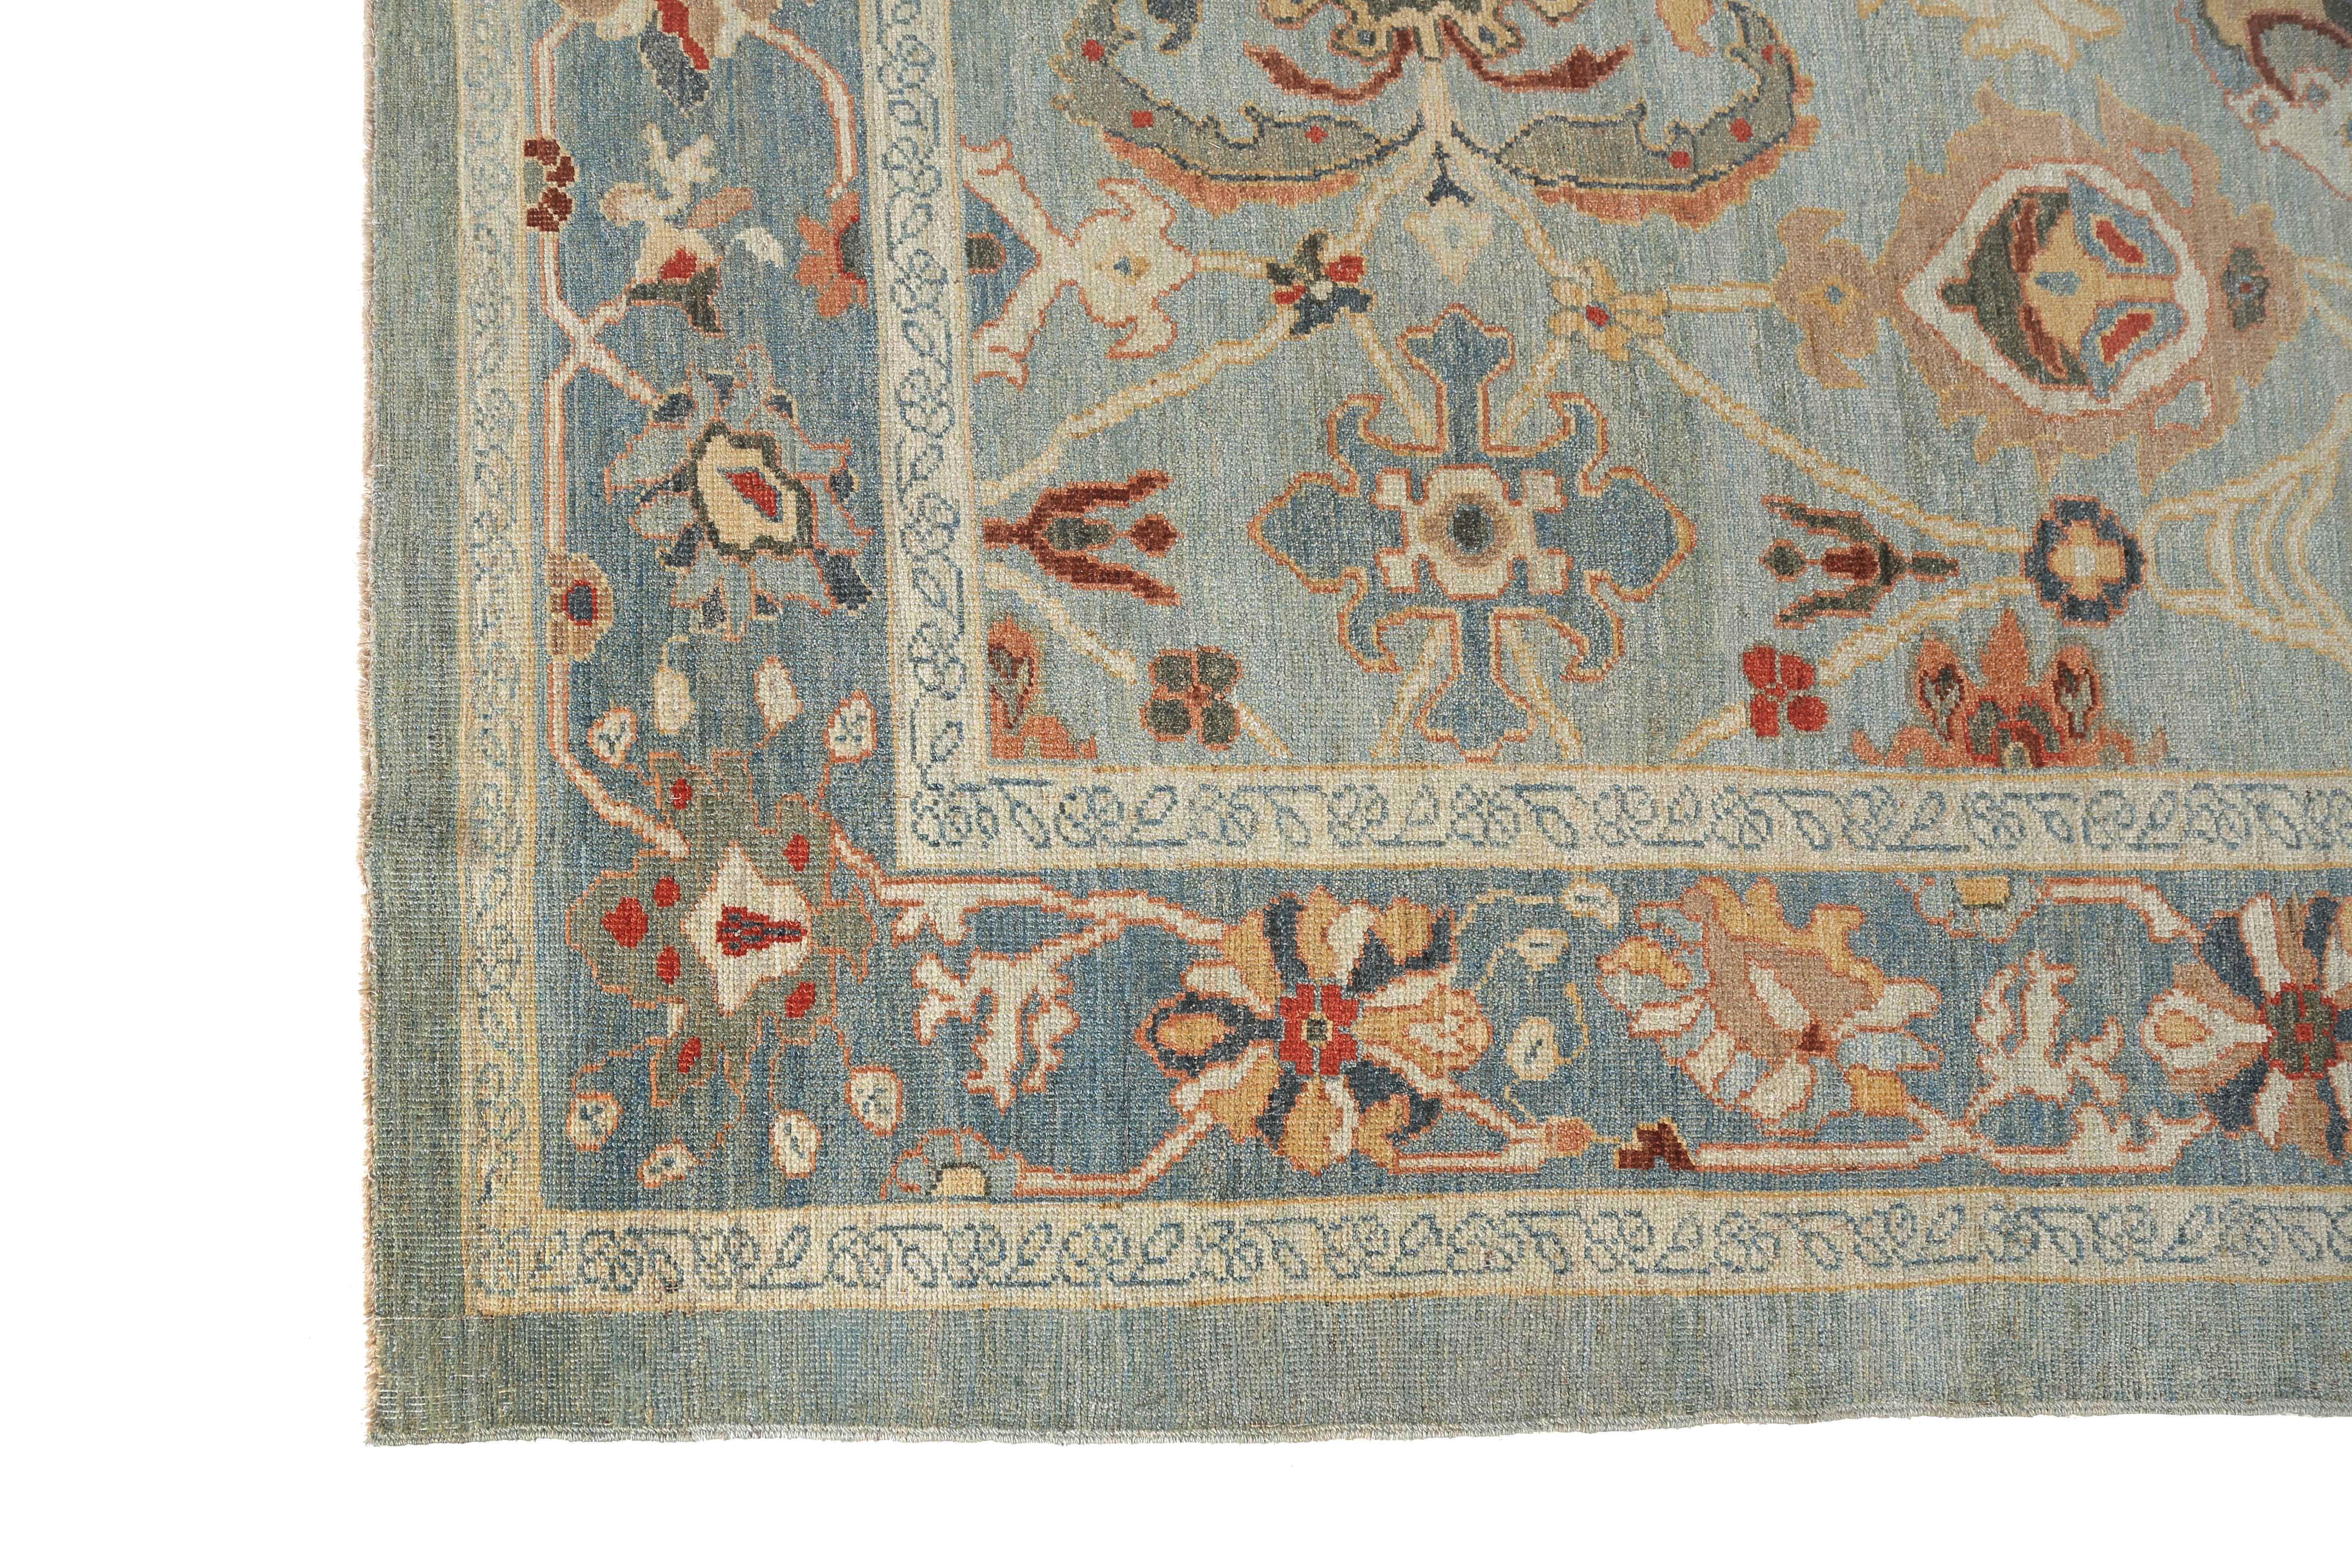 Introducing our stunning handmade Sultanabad rug, measuring 8'2